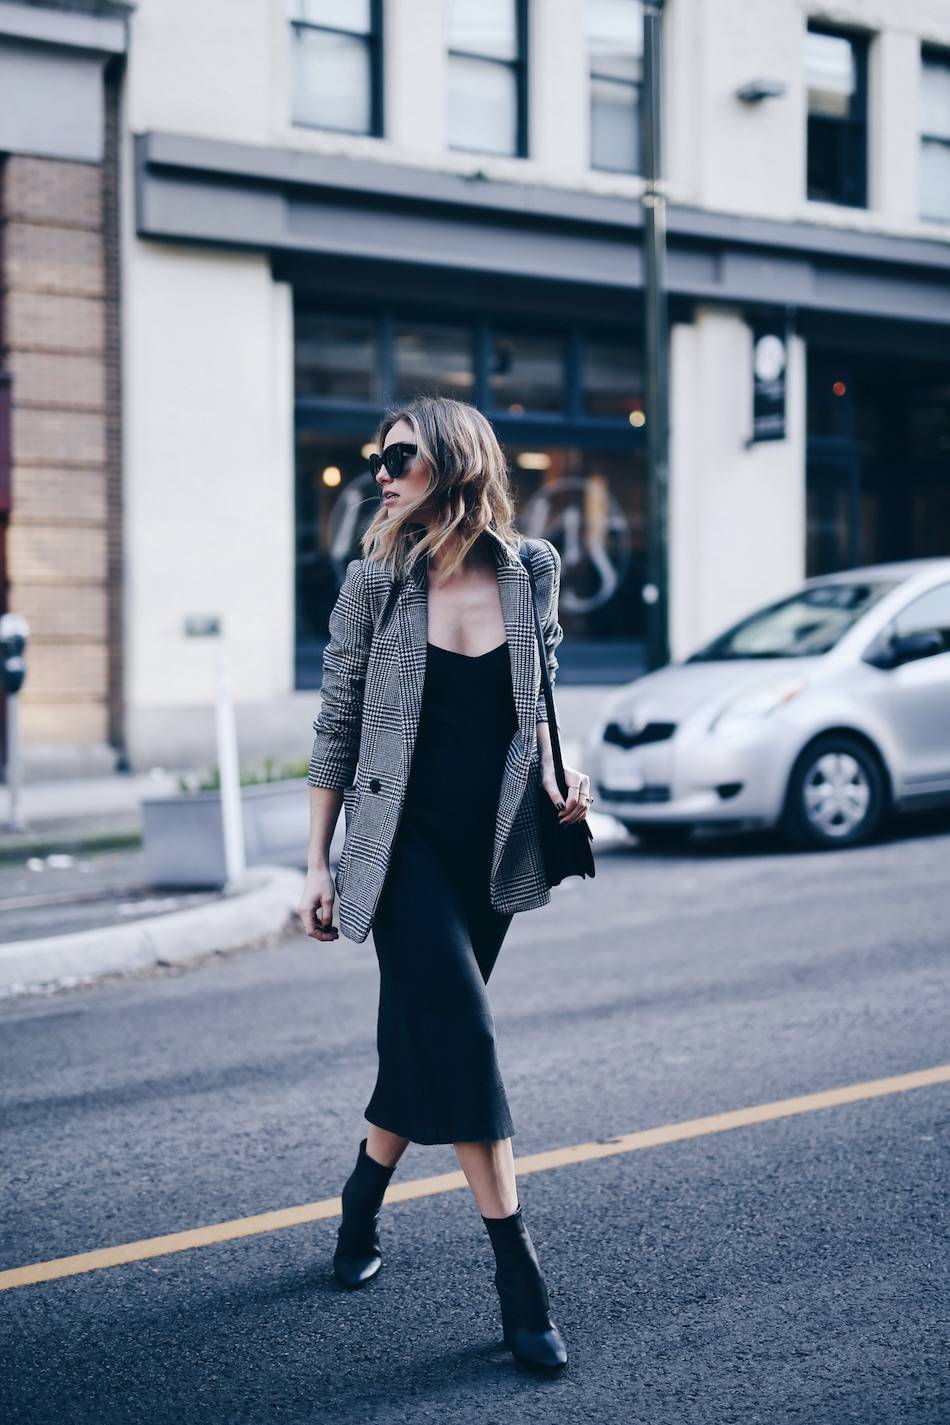 Style and beauty blogger Jill Lansky of The August Diaries on how to wear the perfect slip dress in John Patrick Organic slip dress, plaid boyfriend blazer, 3.1 Phillip Lim boots